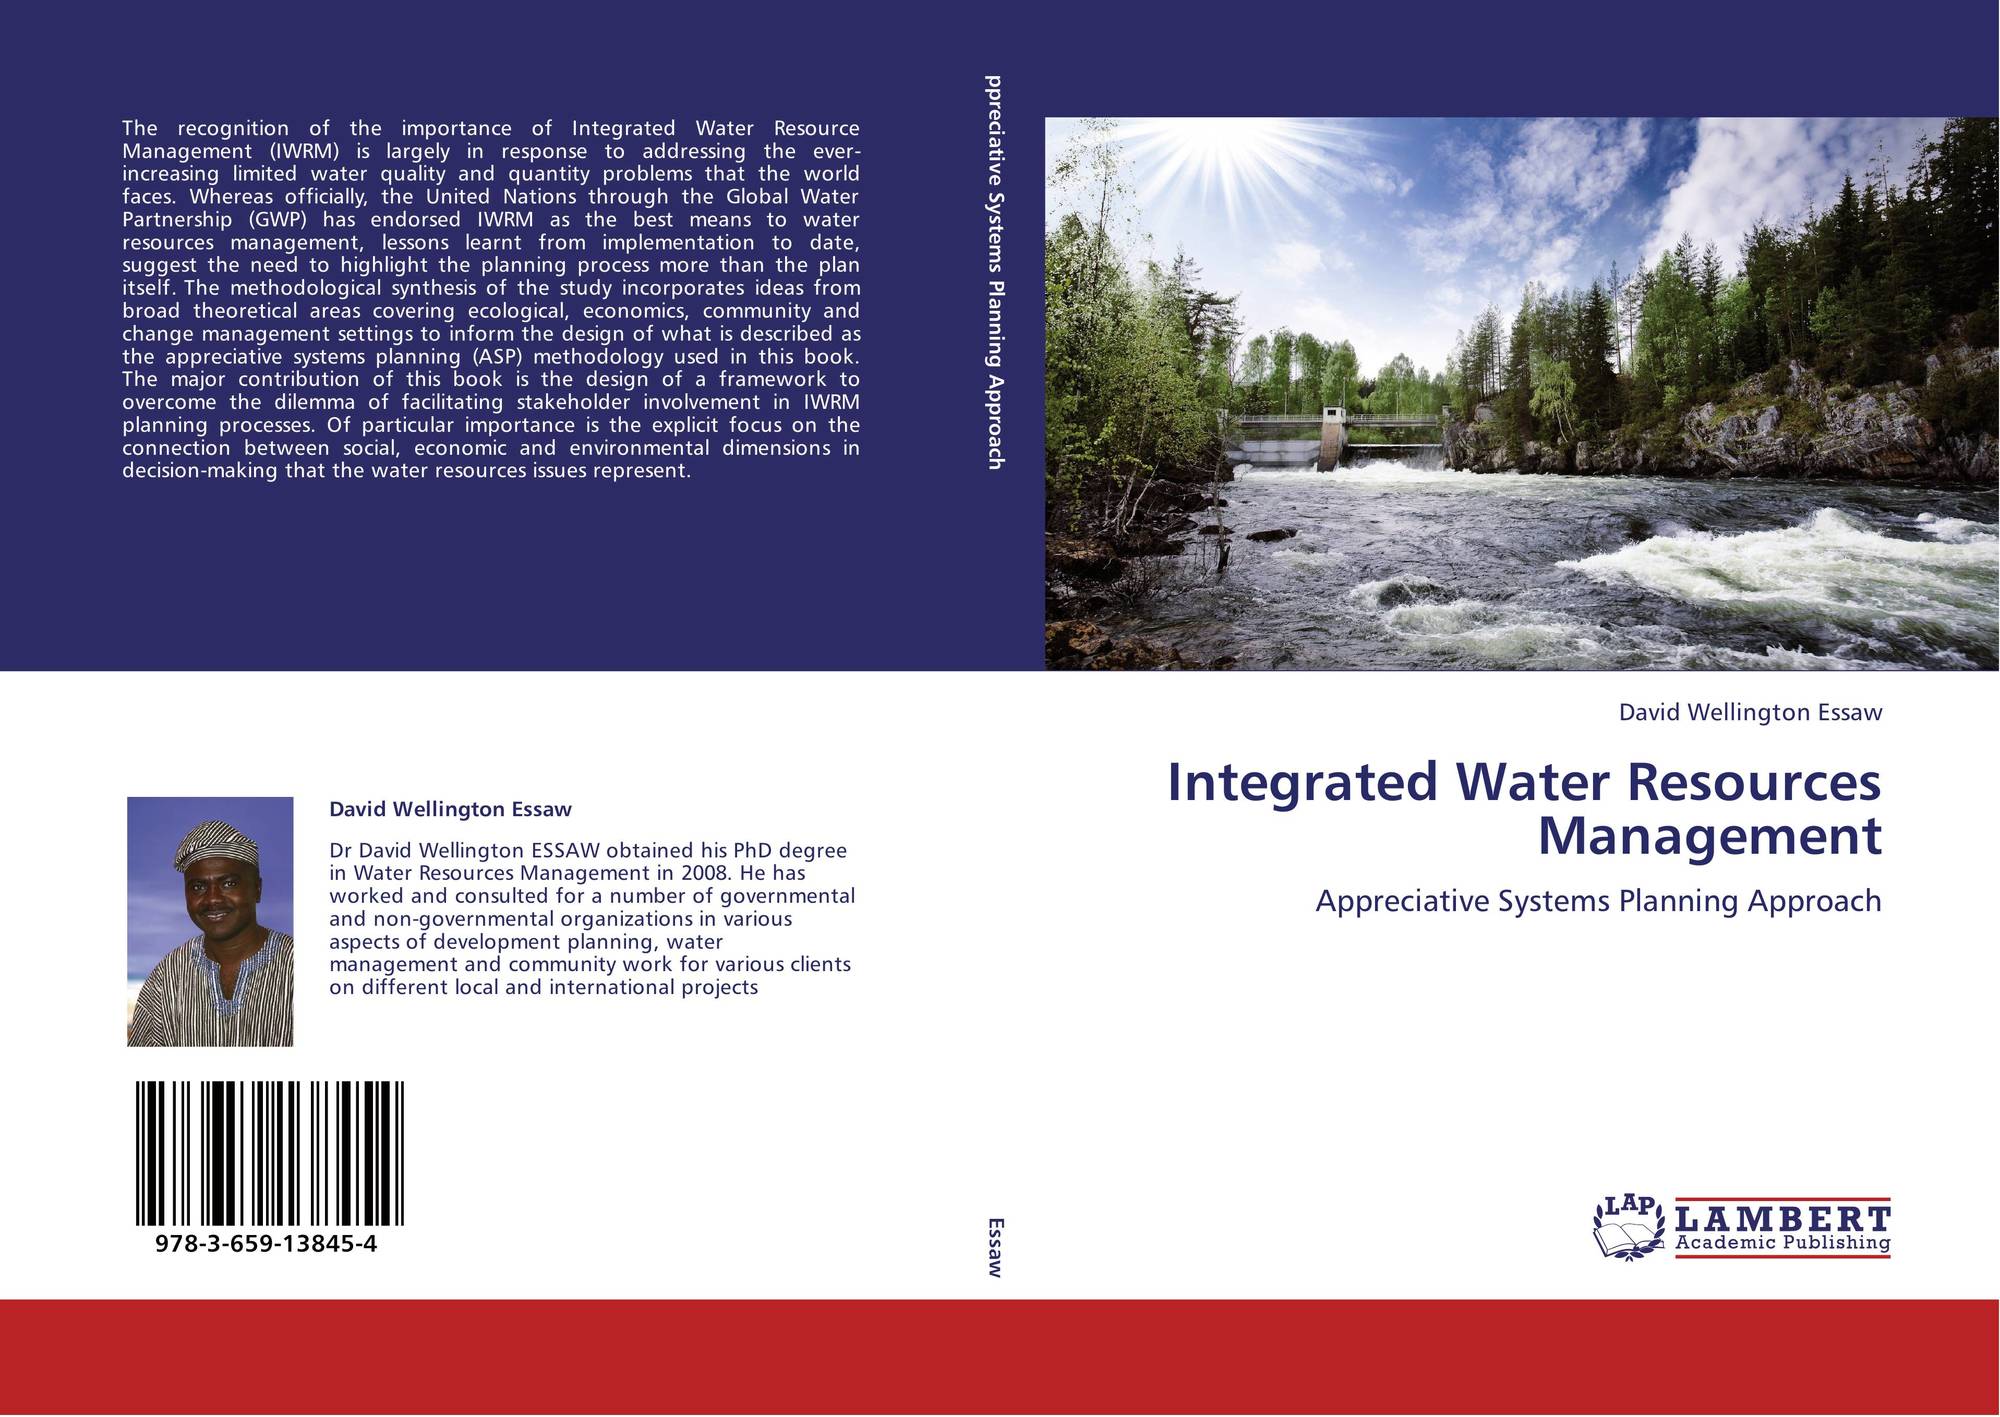 Integrated Water Resources Management, 978-3-659-13845-4, 3659138452  ,9783659138454 by David Wellington Essaw